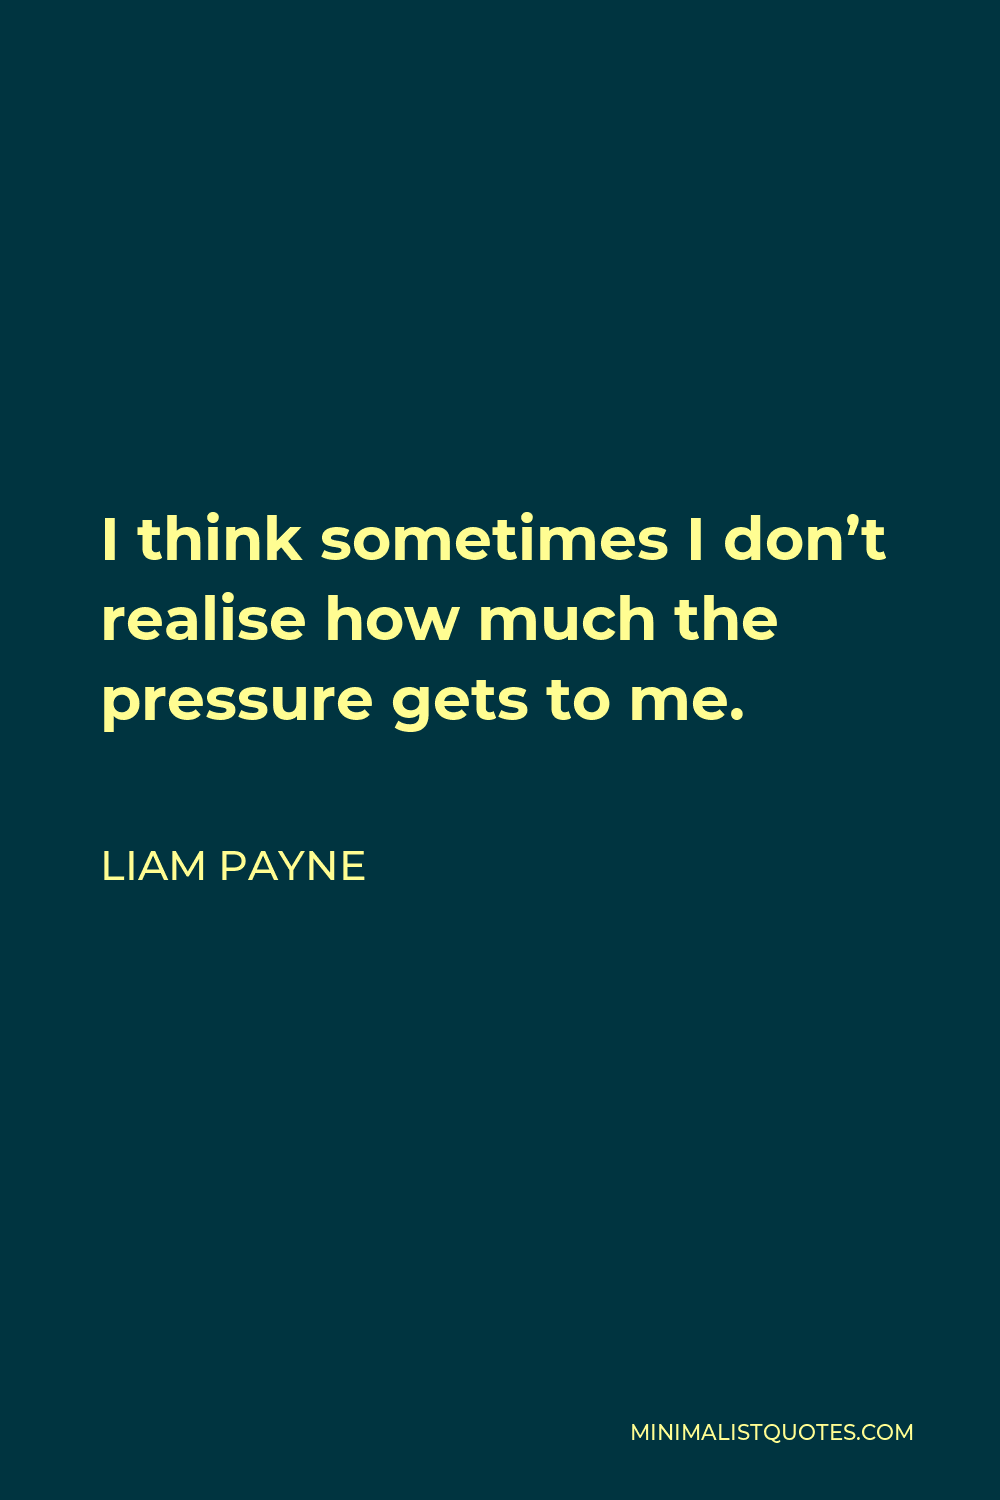 Liam Payne Quote - I think sometimes I don’t realise how much the pressure gets to me.